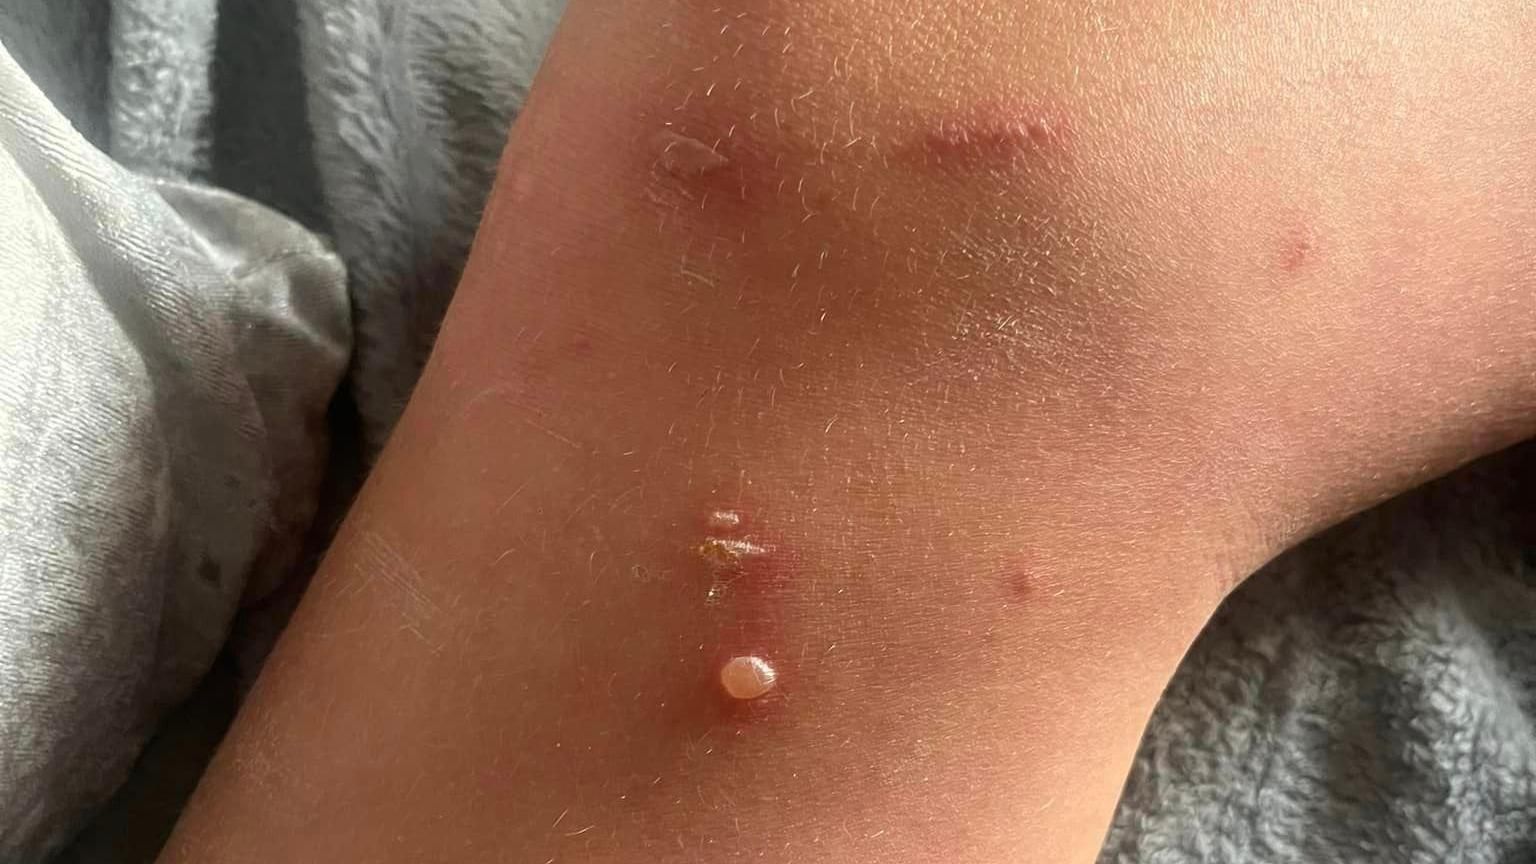 Giant hogwood stings on a boy's leg, which are small and filled with pus.